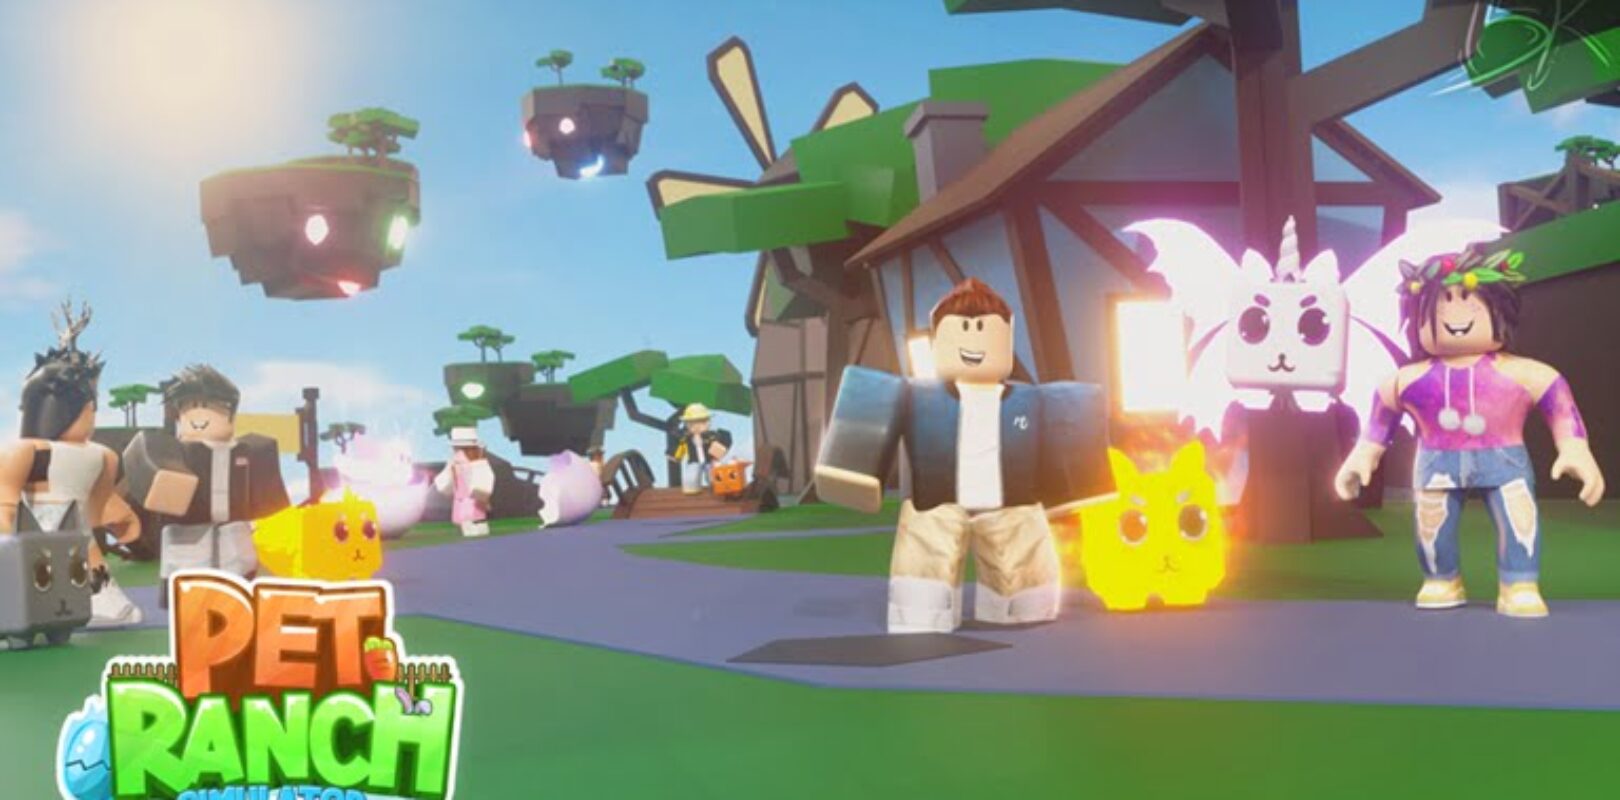 Pet Ranch Simulator Codes 2020 Pivotal Gamers - all pet ranch simulator update 3 codes 2019 pet ranch simulator 10 mil pet update 3 roblox